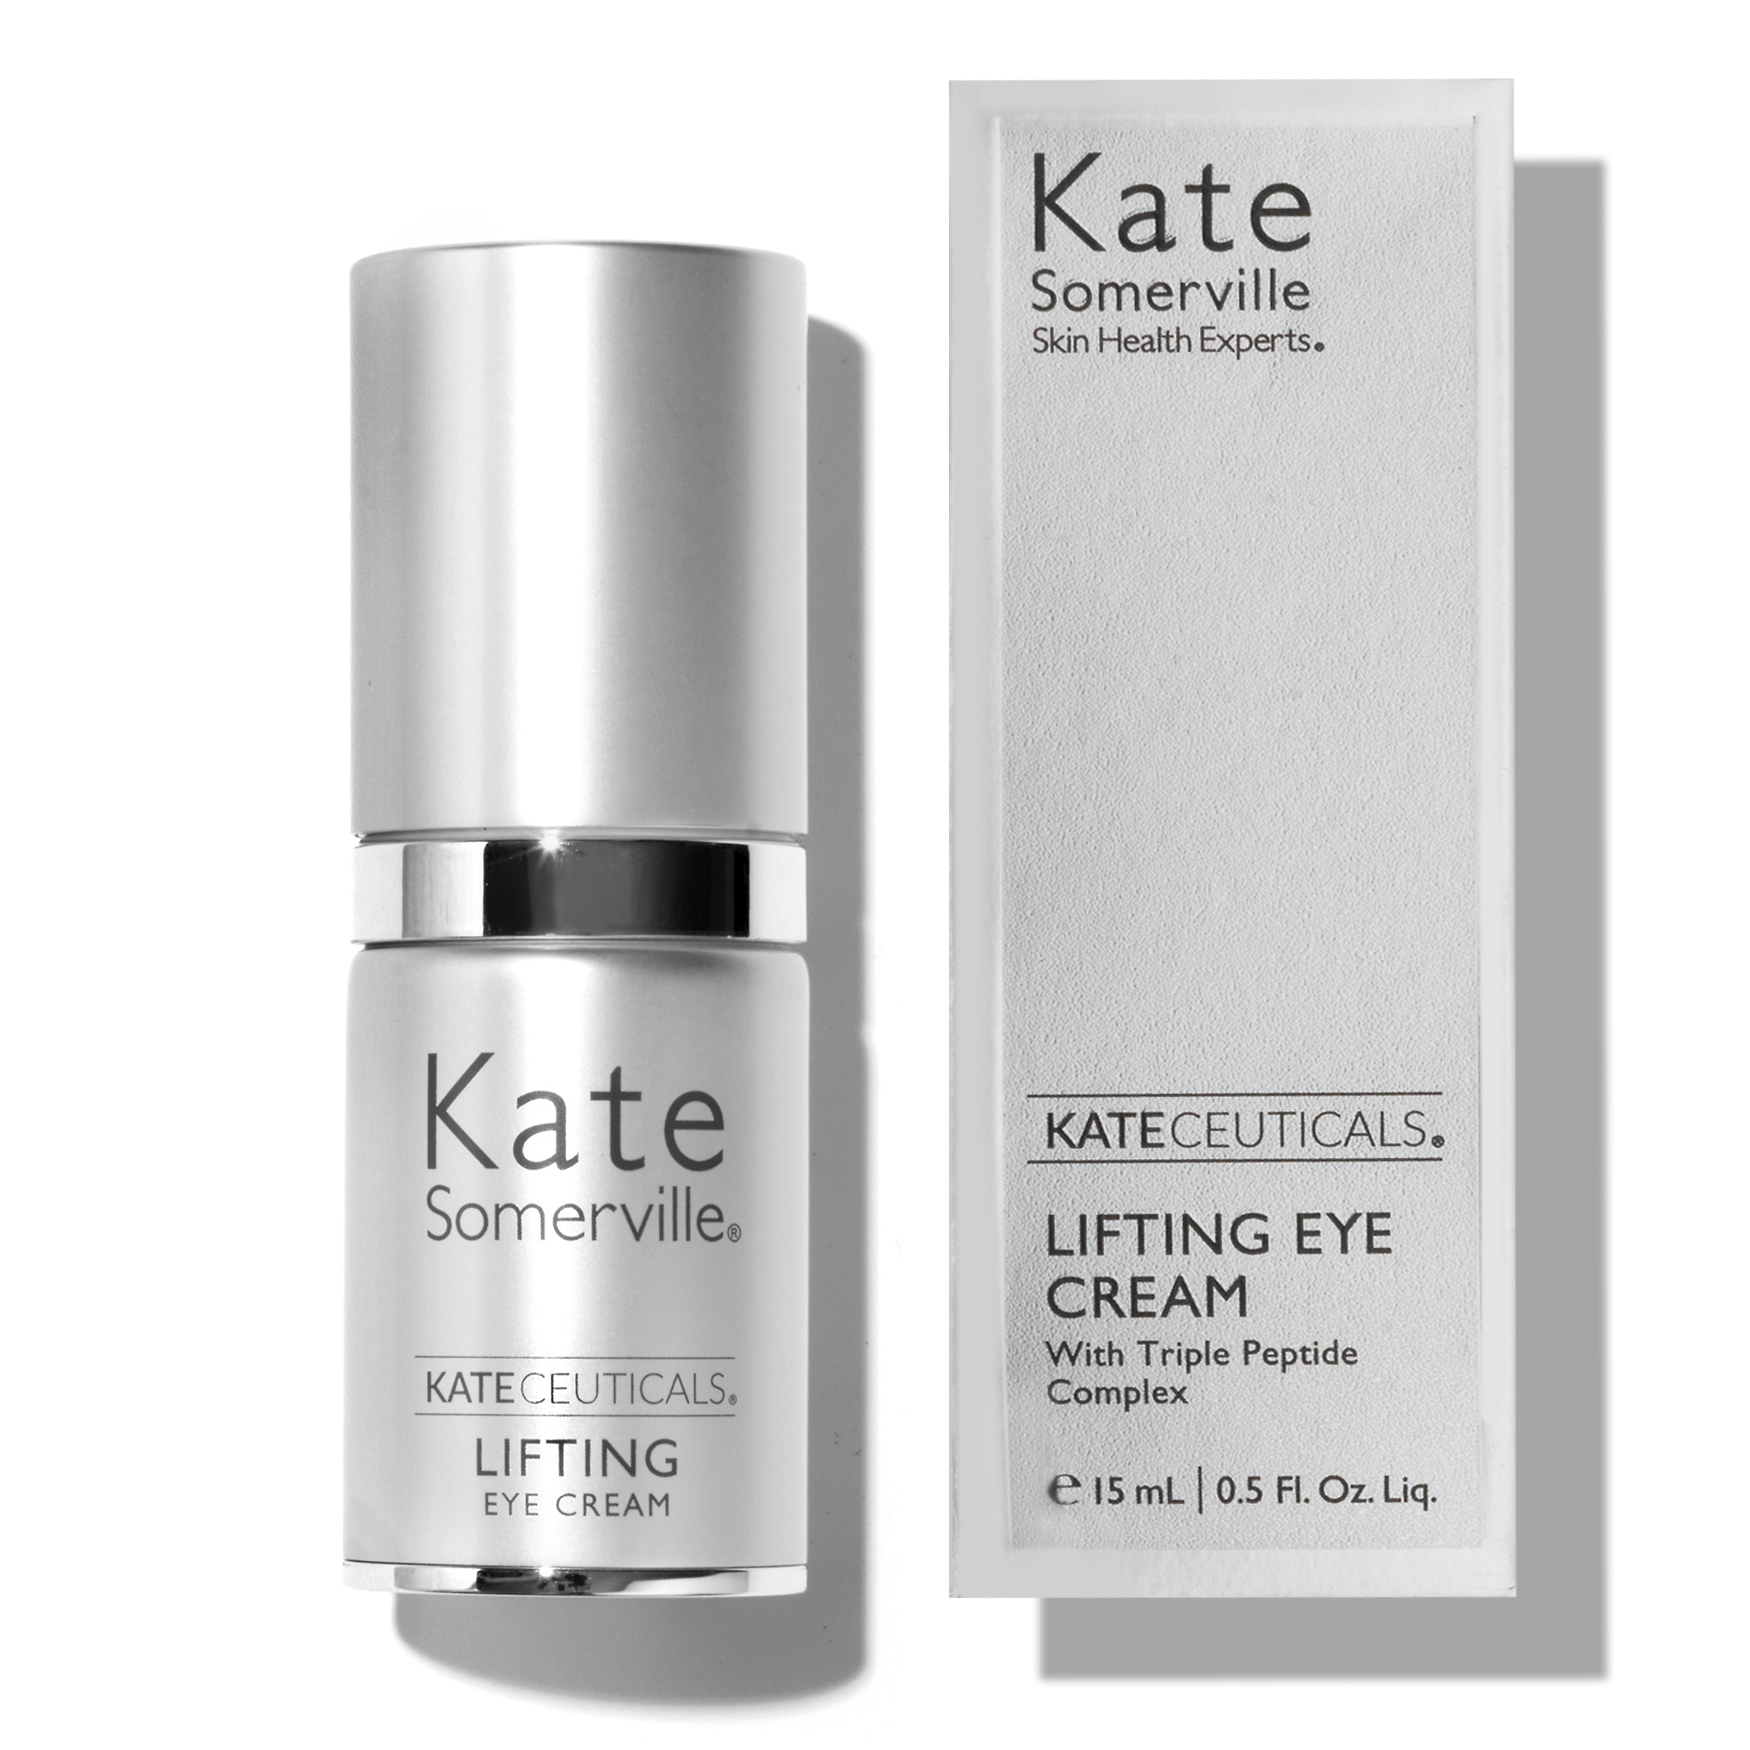 The Kate Somerville products to add to skincare routine